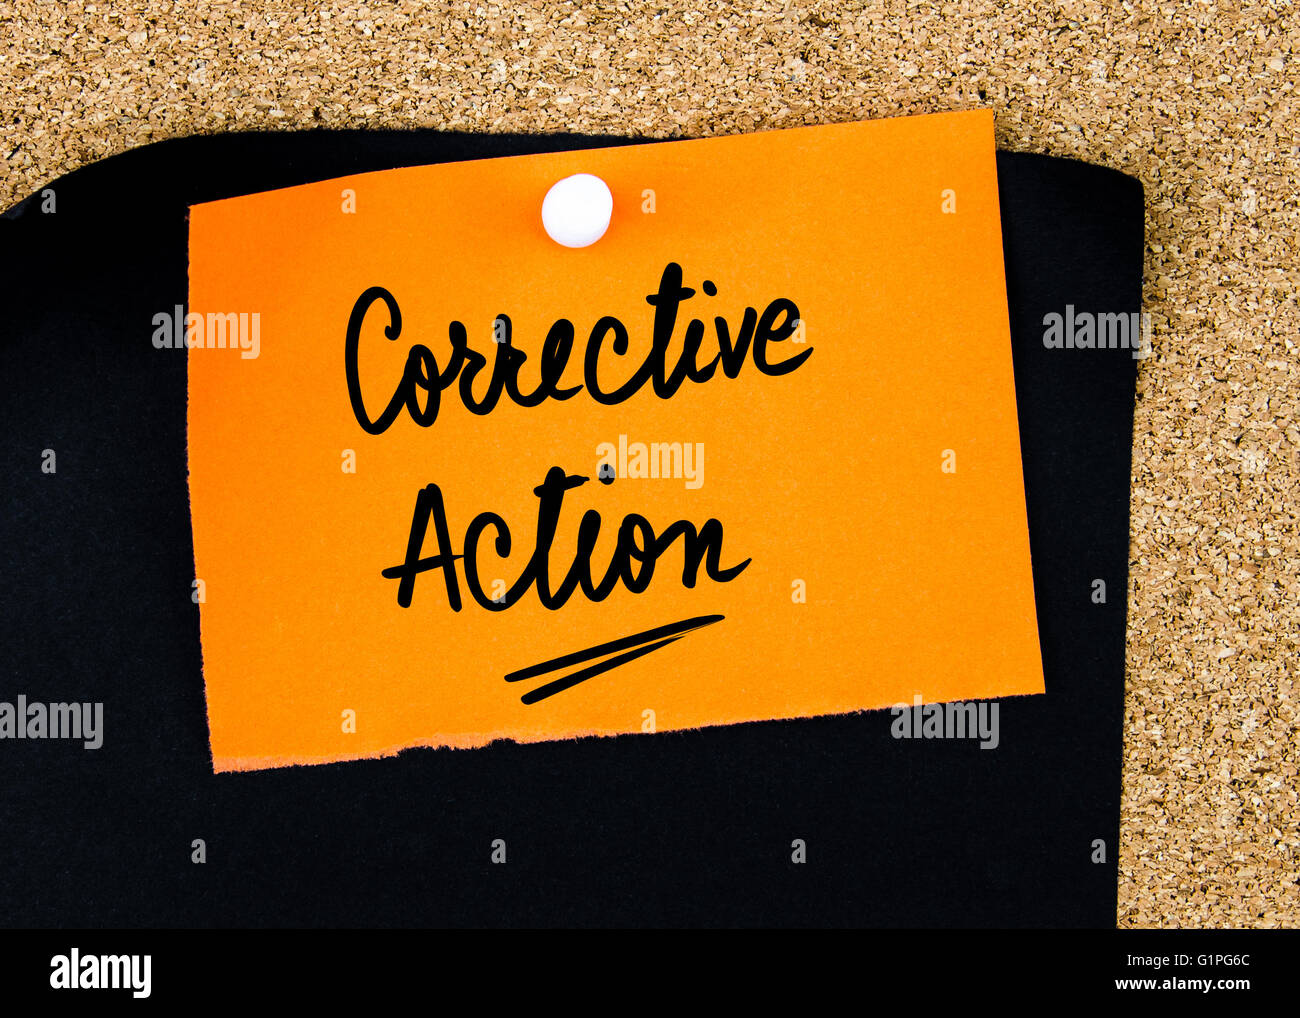 Corrective Action written on orange paper note pinned on cork board with white thumbtacks, copy space available Stock Photo